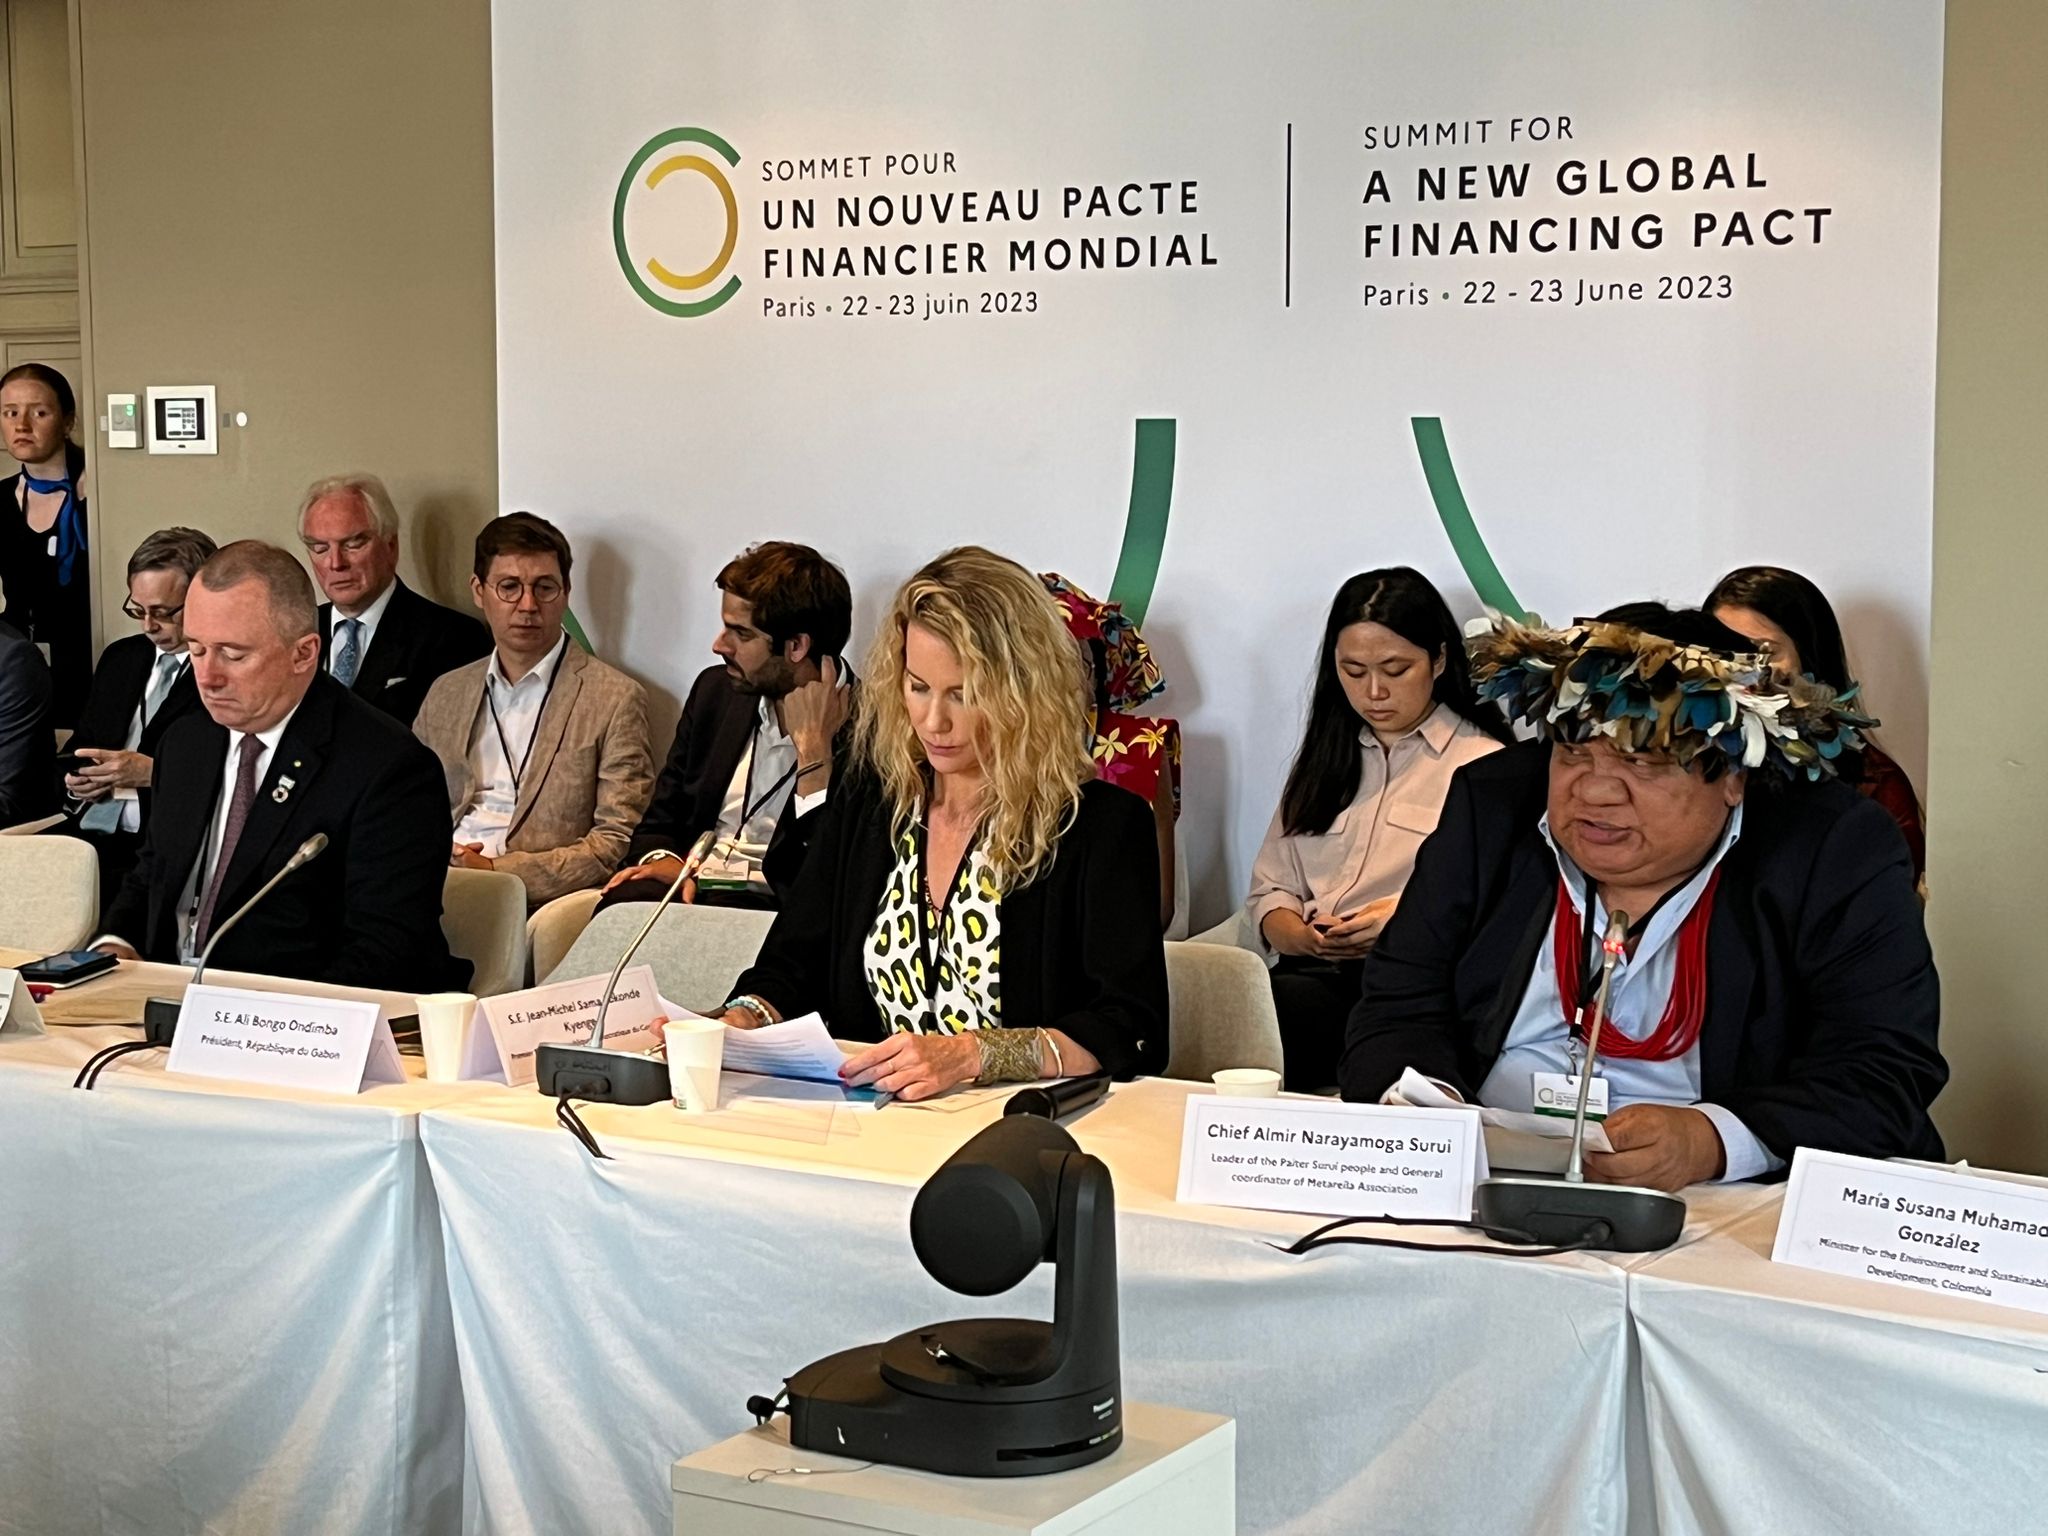 Summit for a New Global Financing Pact – NatureFinance Takeaways